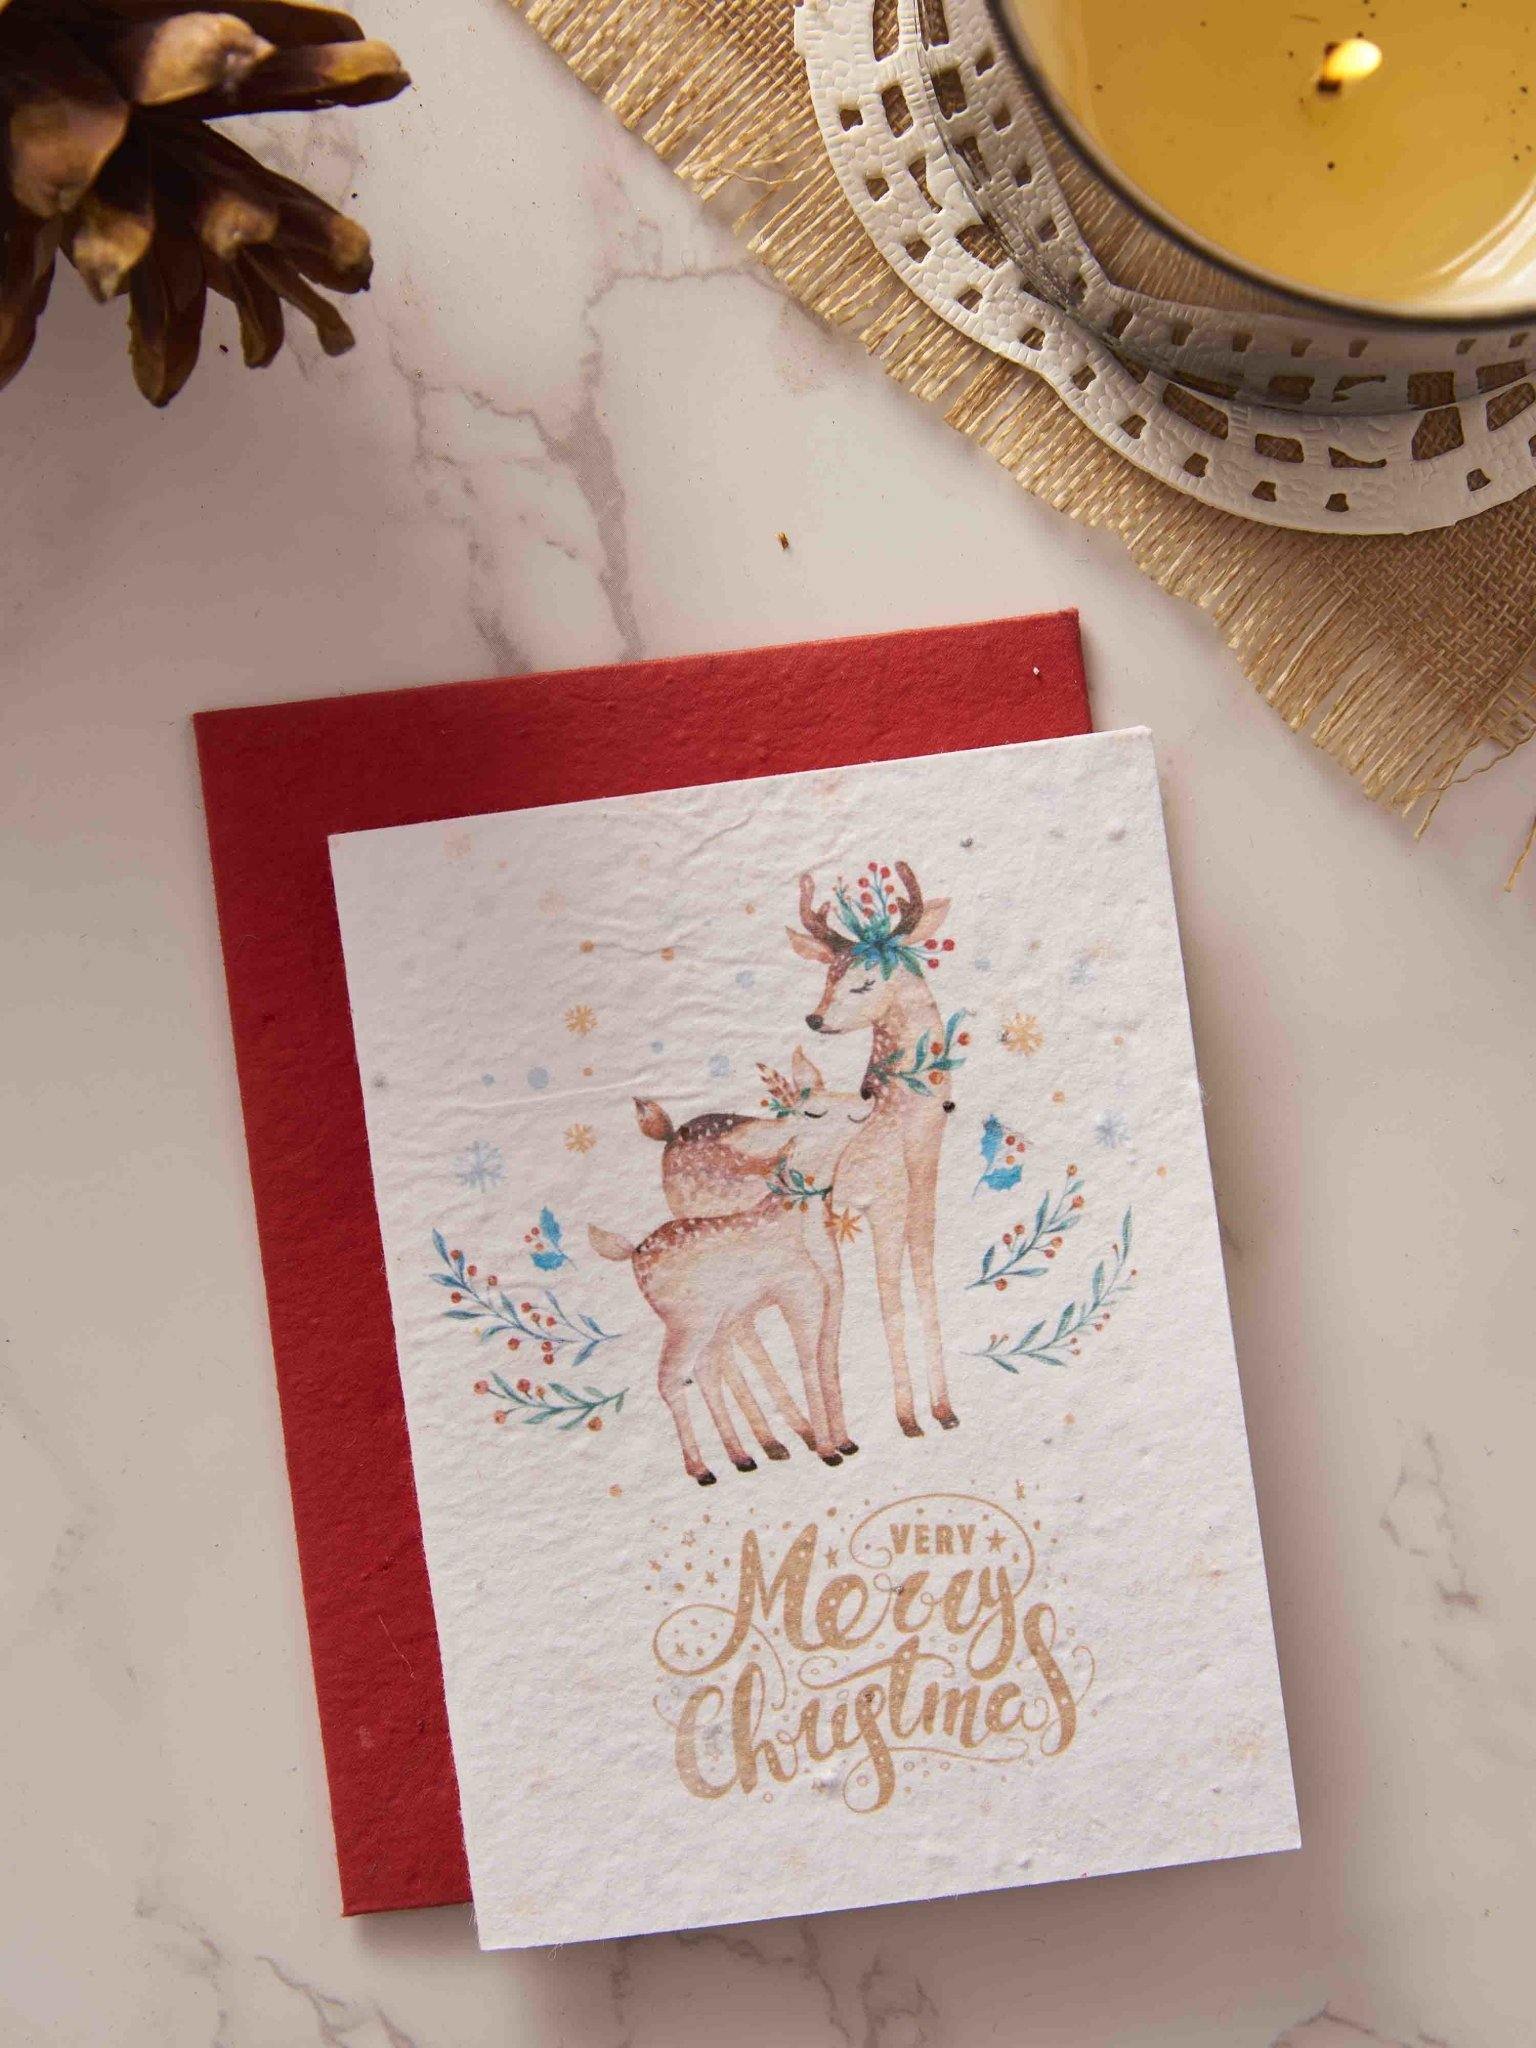  Merry Christmas greeting card in red and white theme